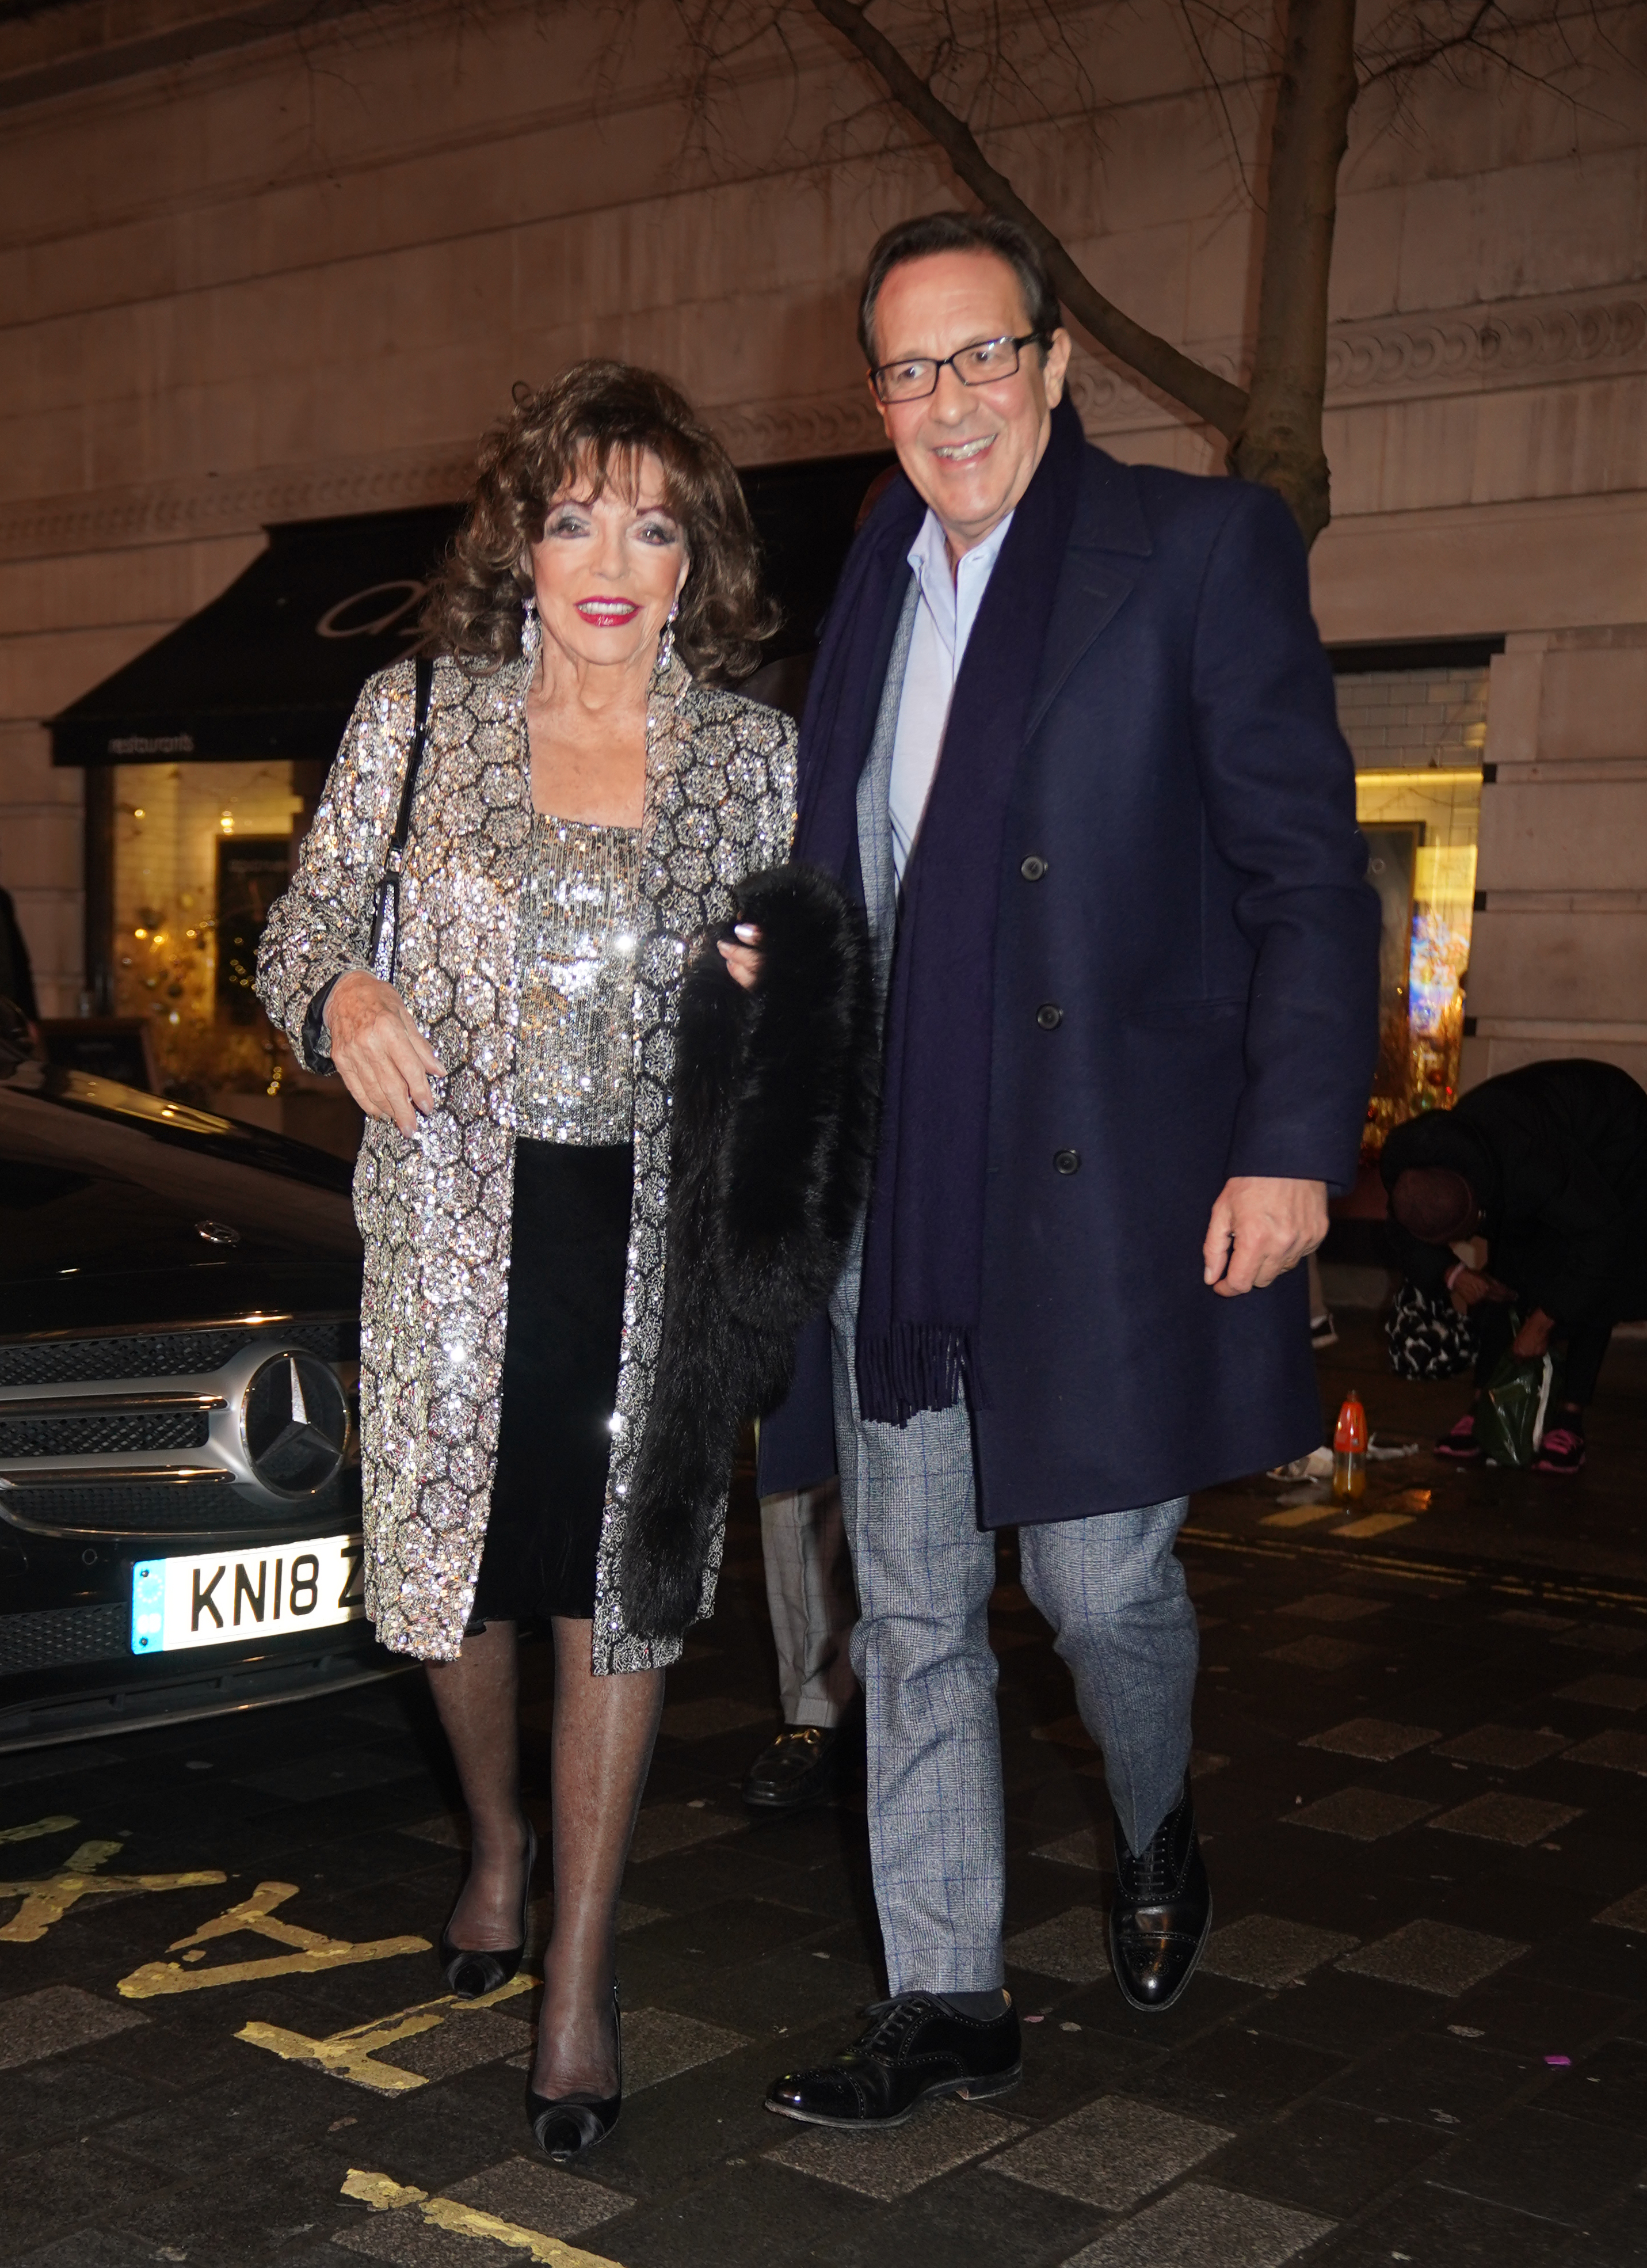 Dame Joan Collins and Percy Gibson at the "Peter Pan" theatre show at London Palladium | Source: Getty Images